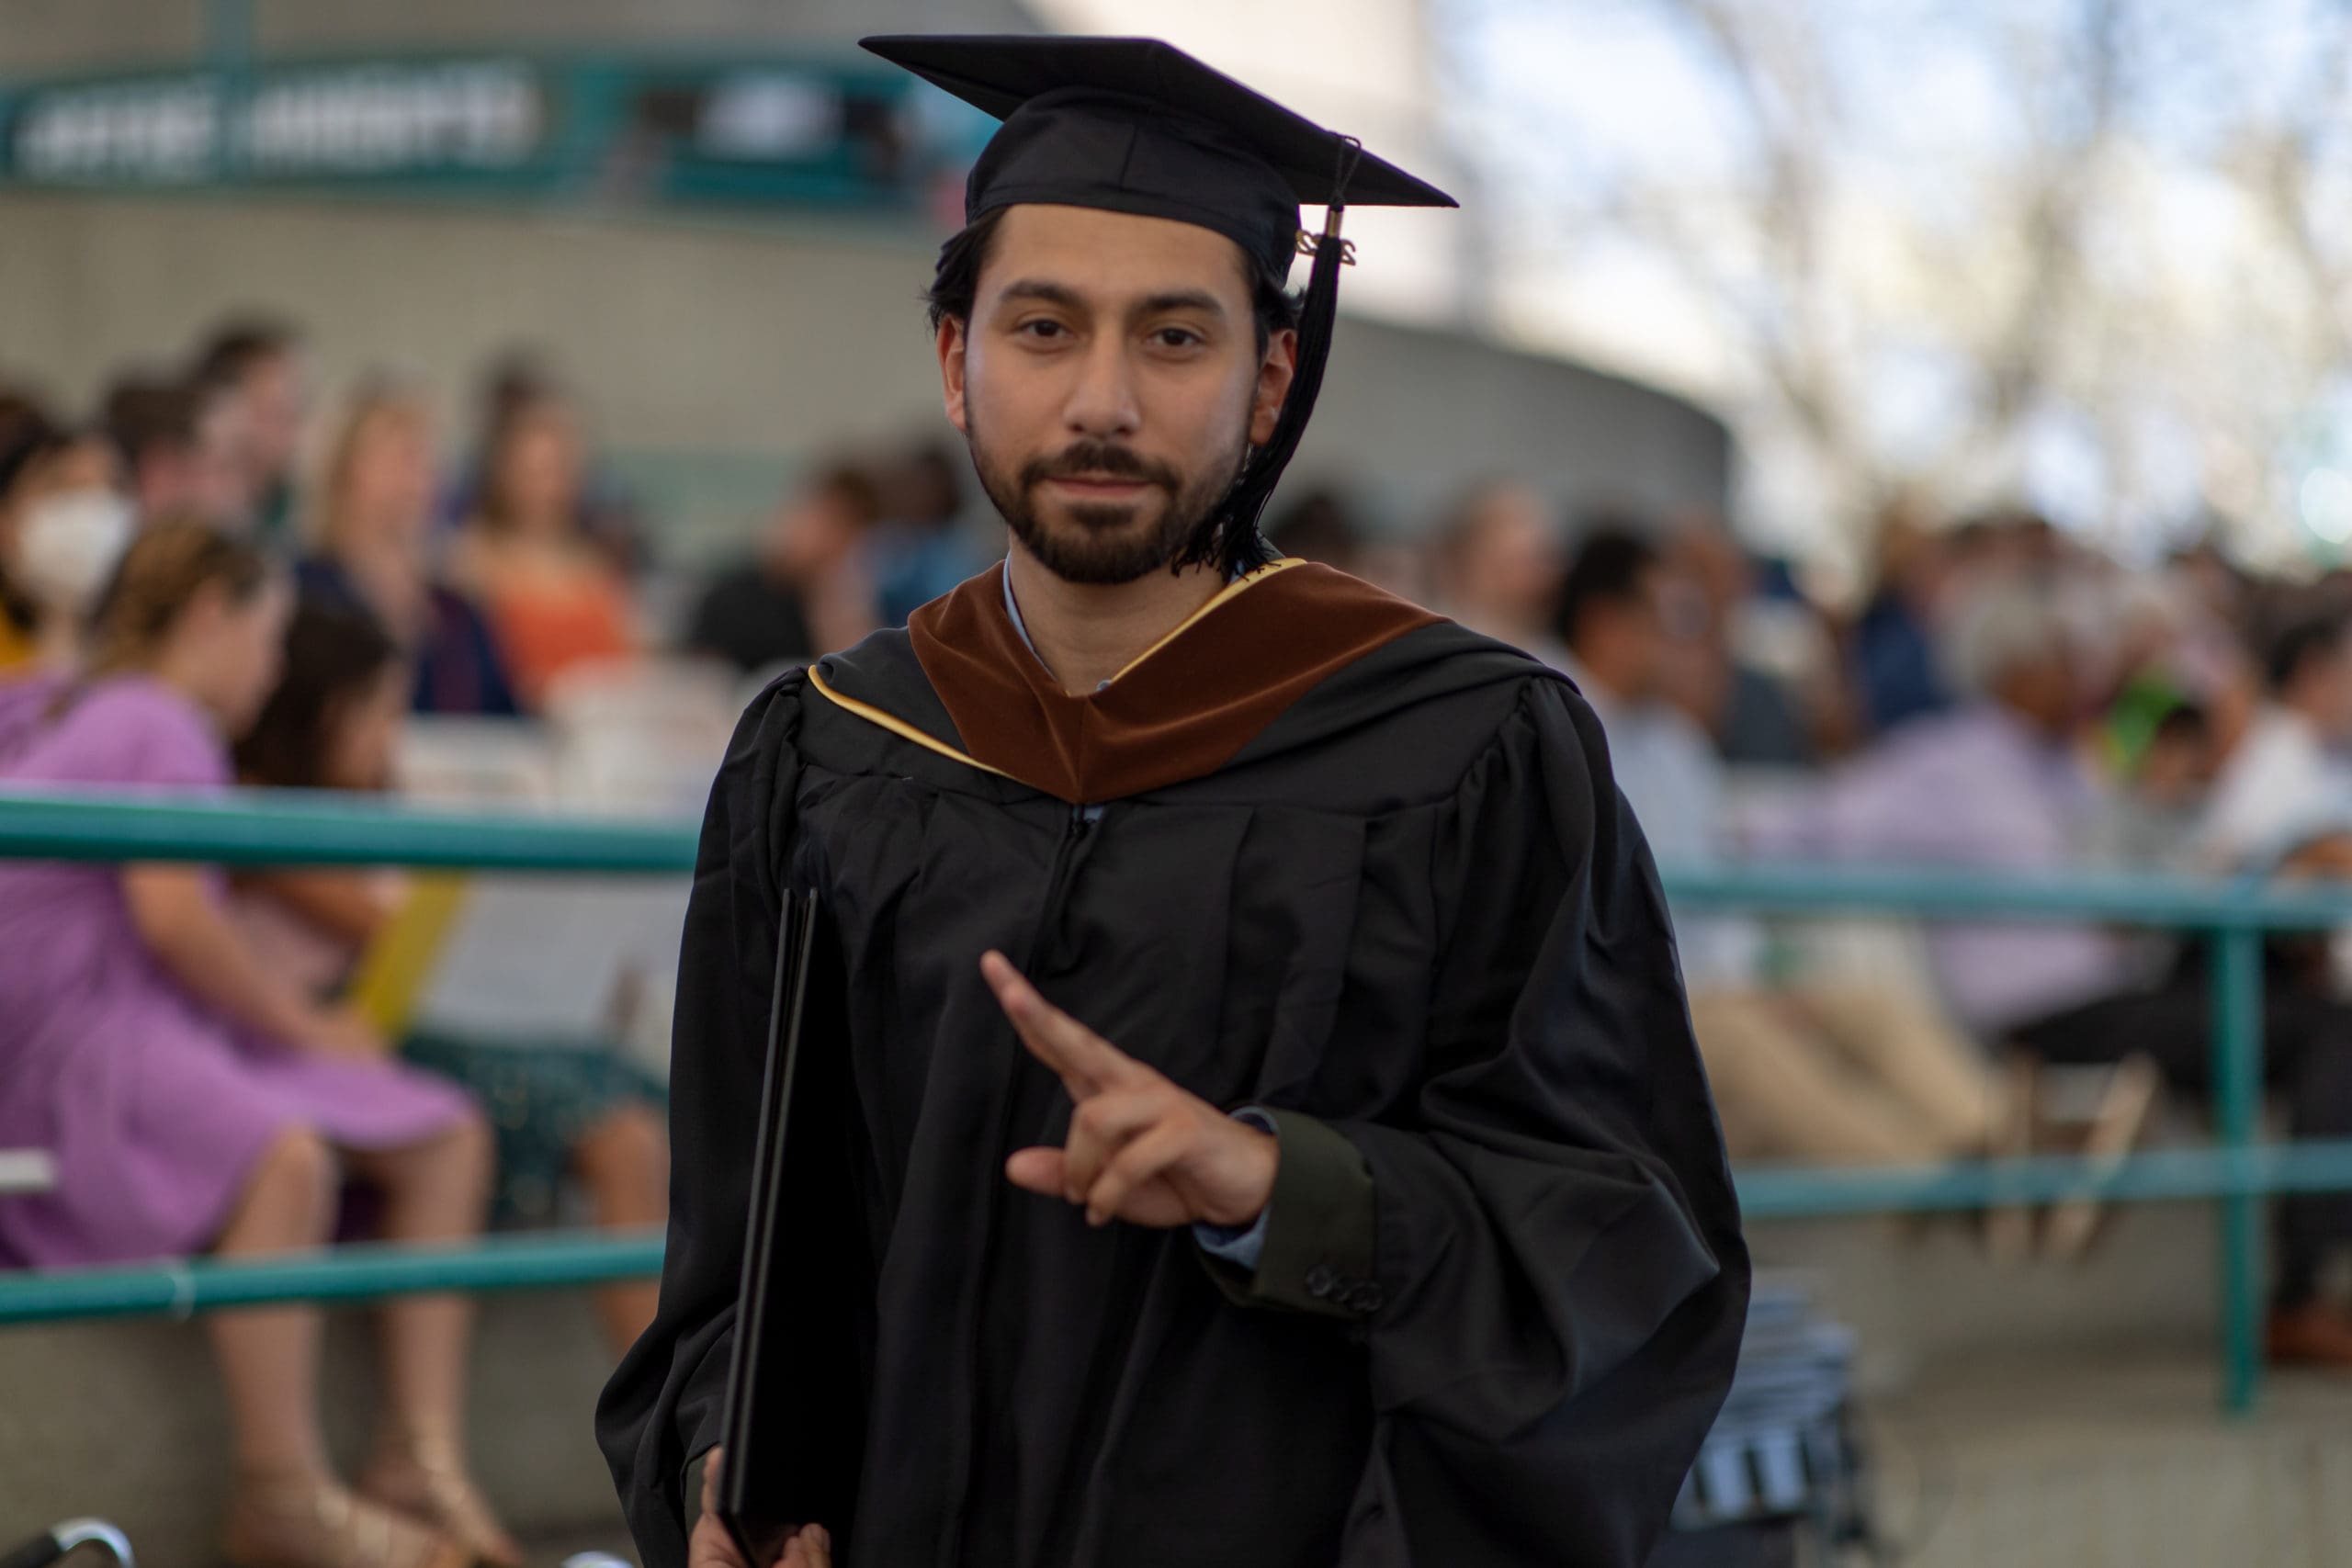 Graduate student in black robes throws a peace sign to the camera while walking past the audience with their new diploma.